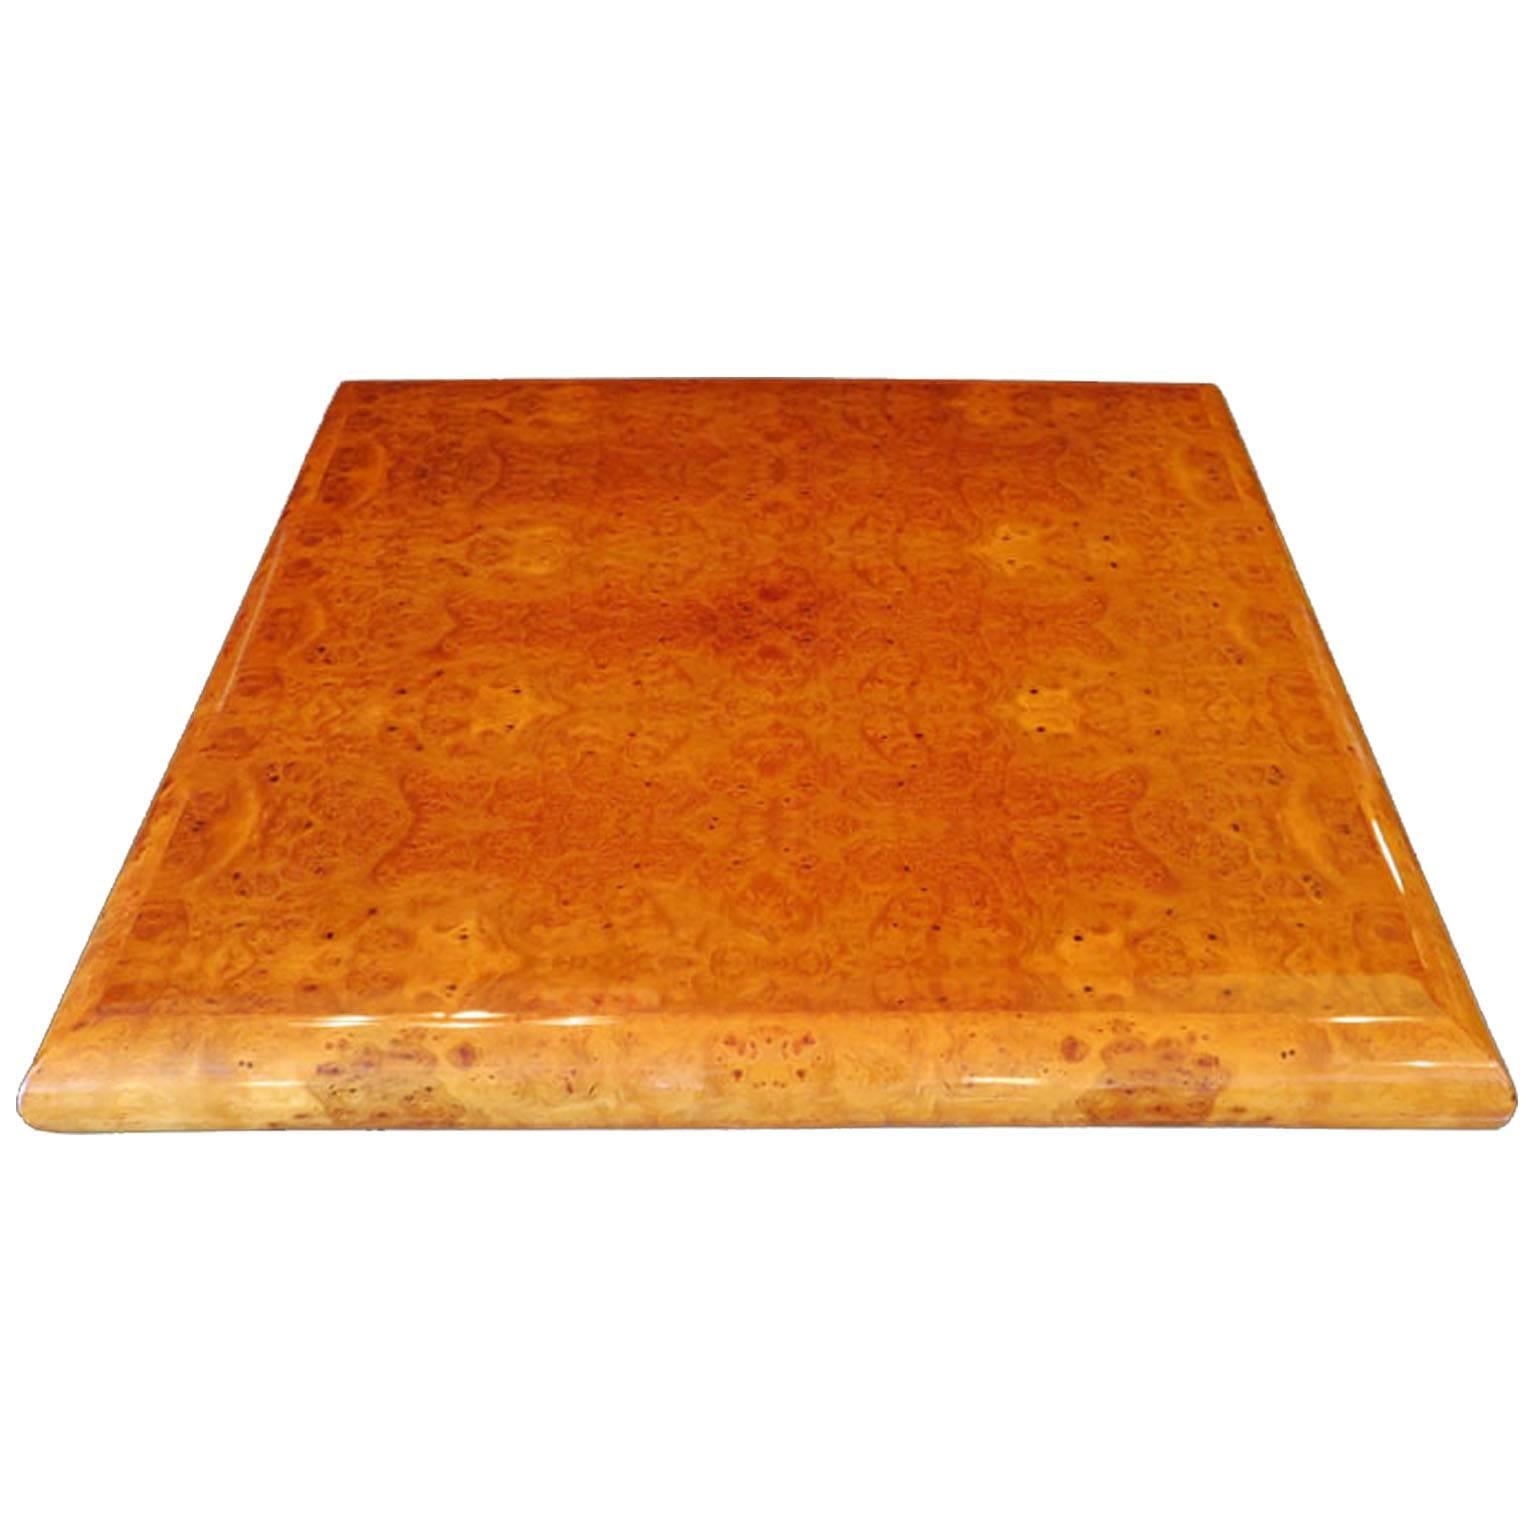 Large-scale square, Art Deco coffee table in rich lacquered elm burl. High-gloss and glamorous, features minimalist modern design with rounded corners, 1940s, France.

